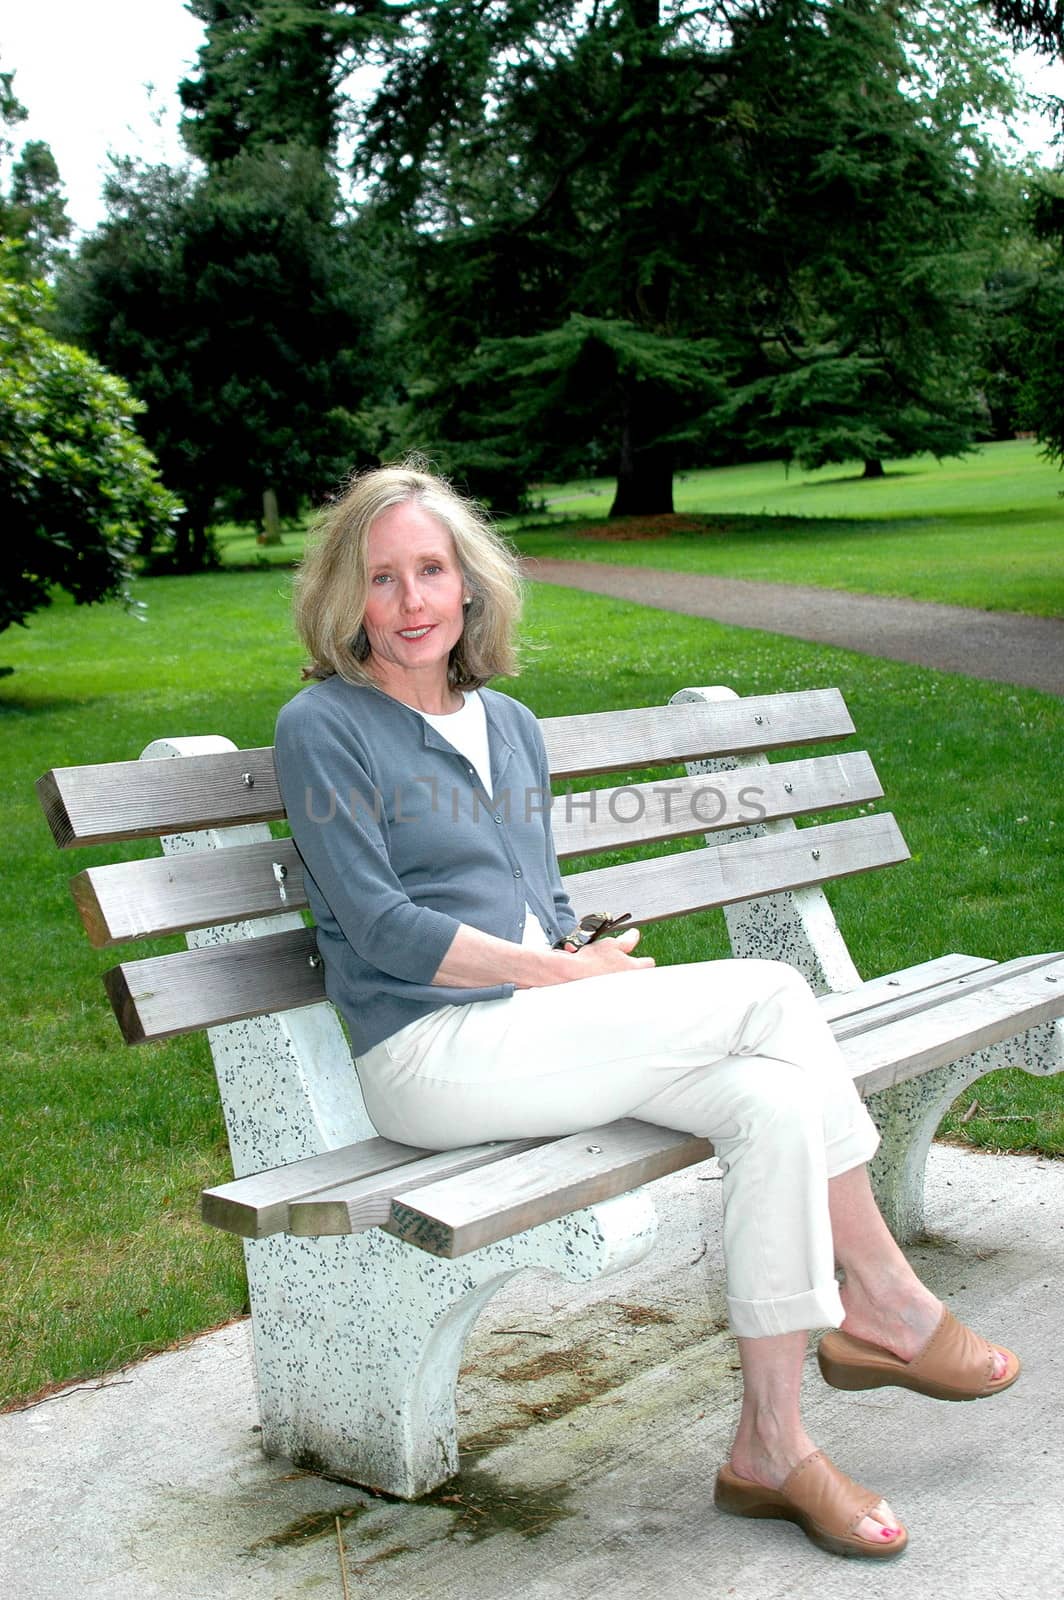 Mature female beauty relaxing on a park bench outdoors.